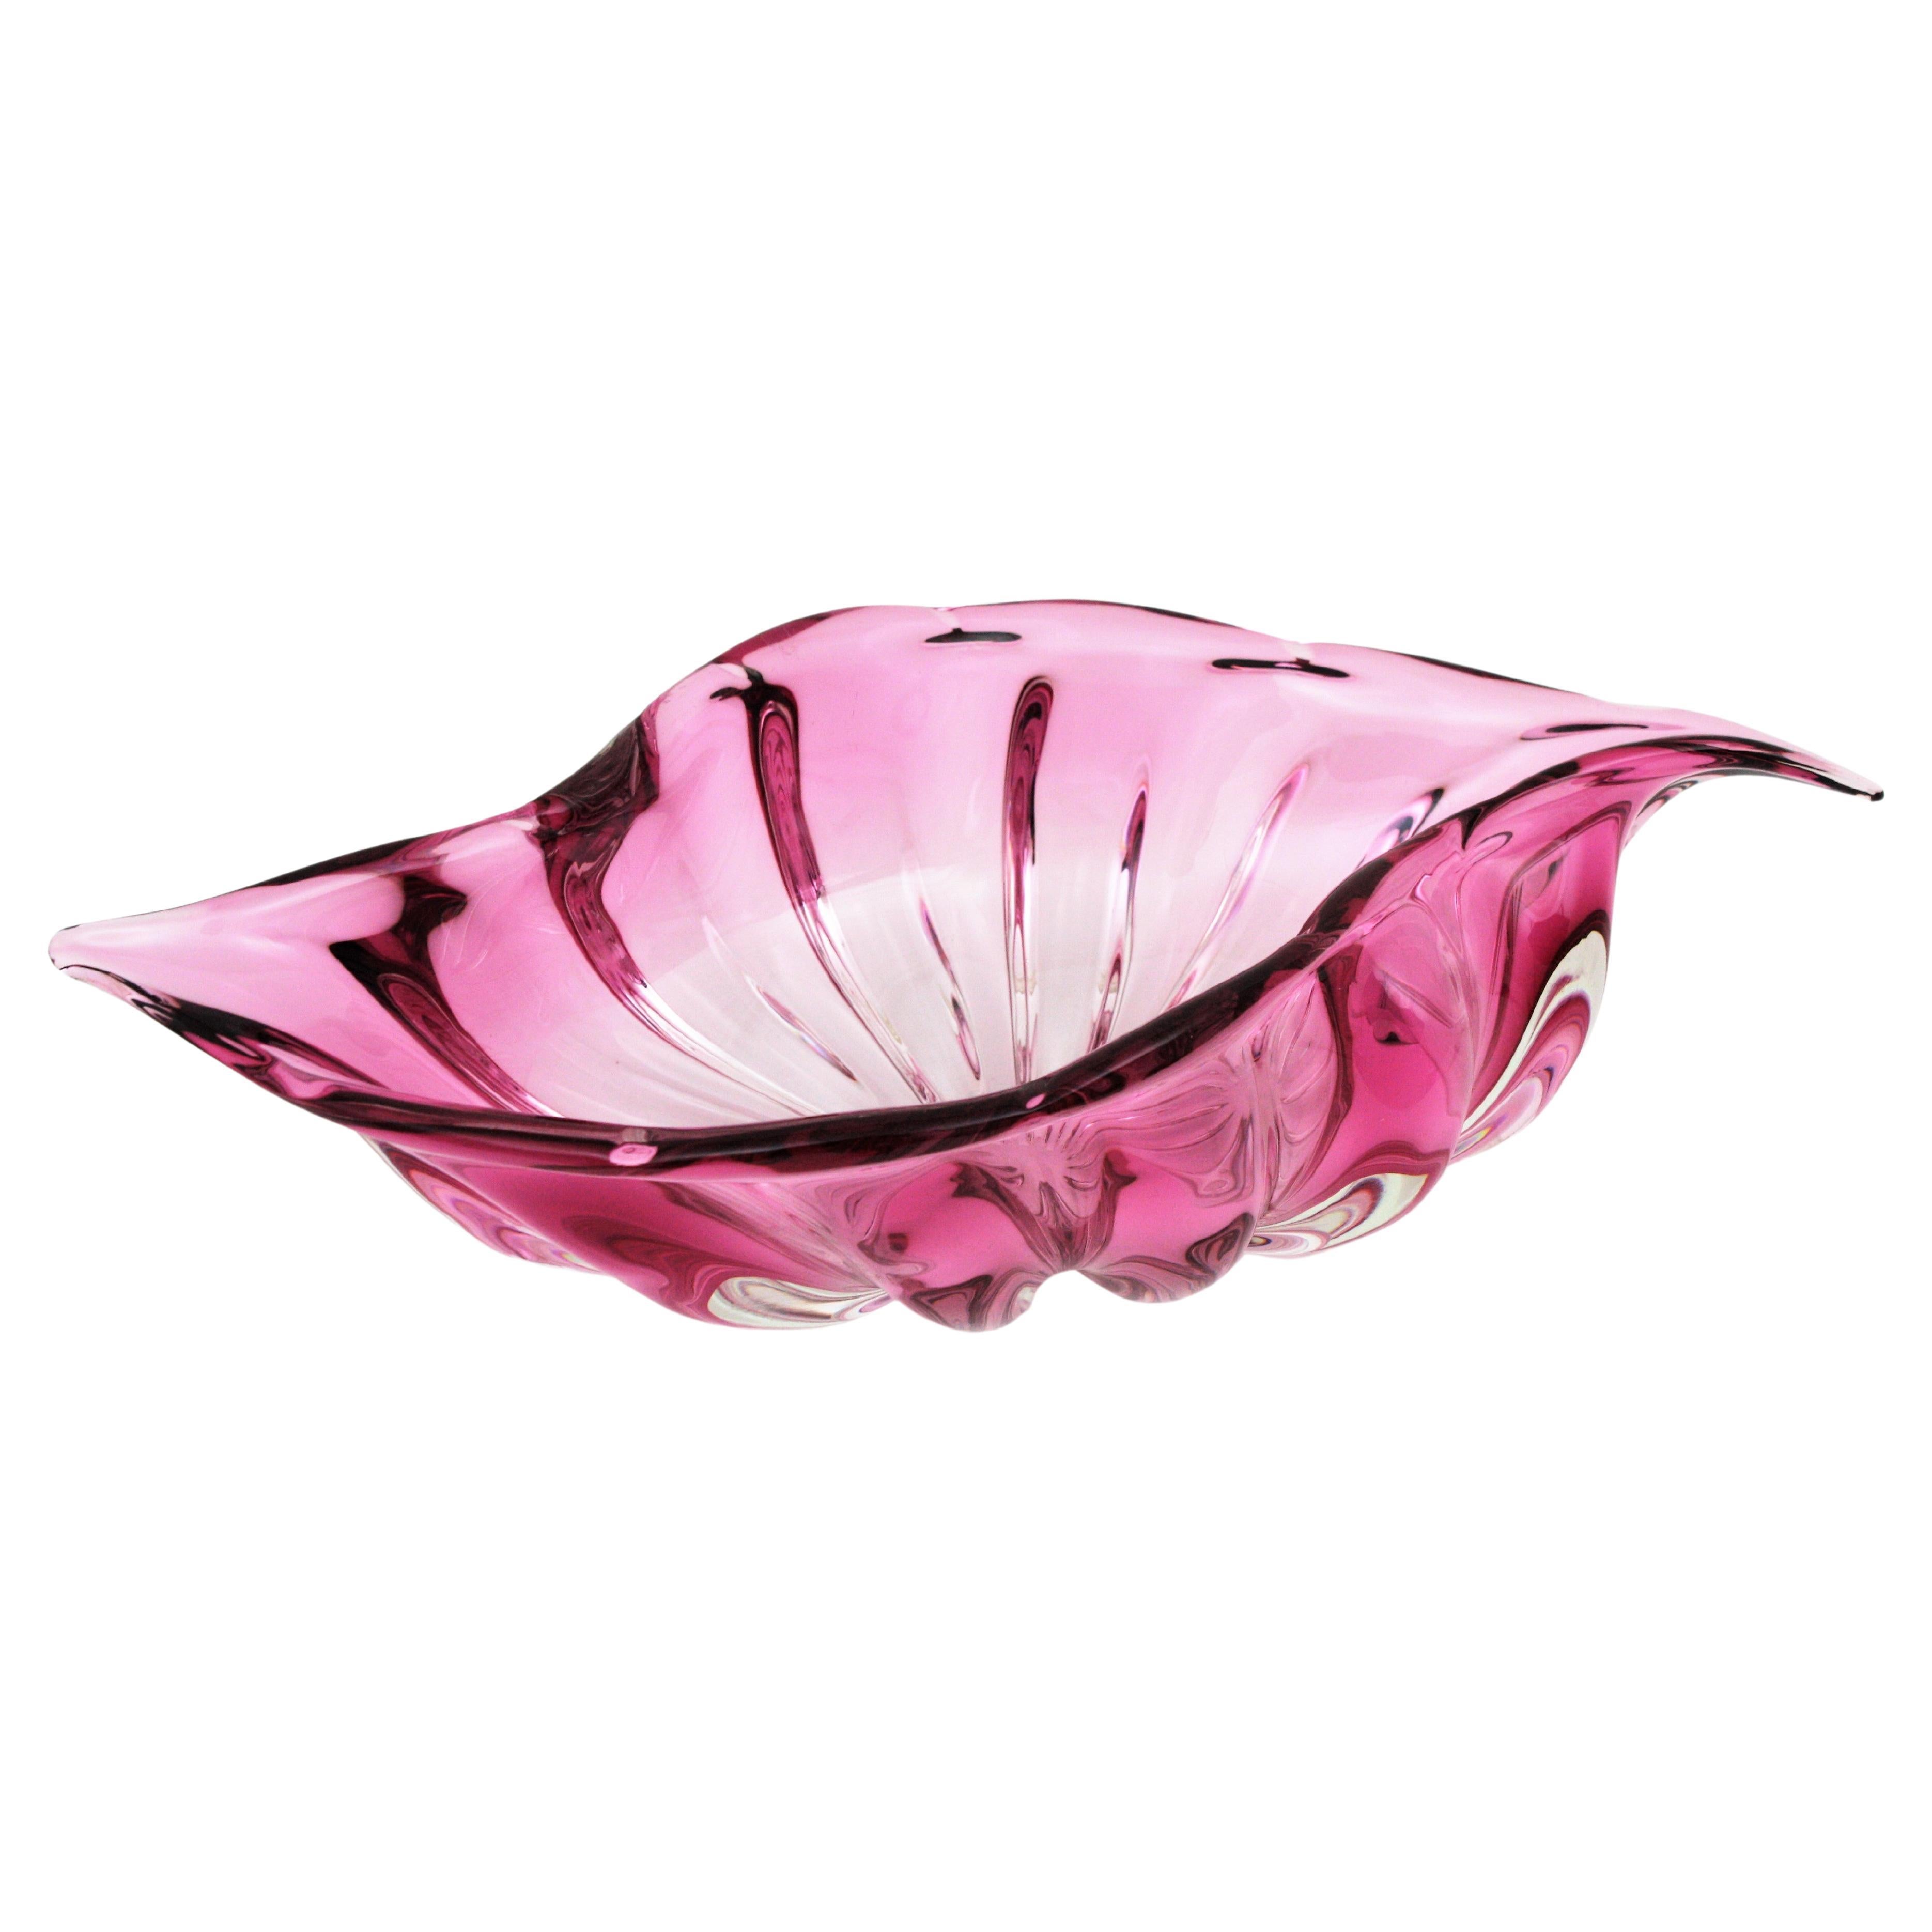 Hollywood Regency Alfredo Barbini Murano Sommerso Pink Art Glass Centerpiece Decorative Bowl For Sale